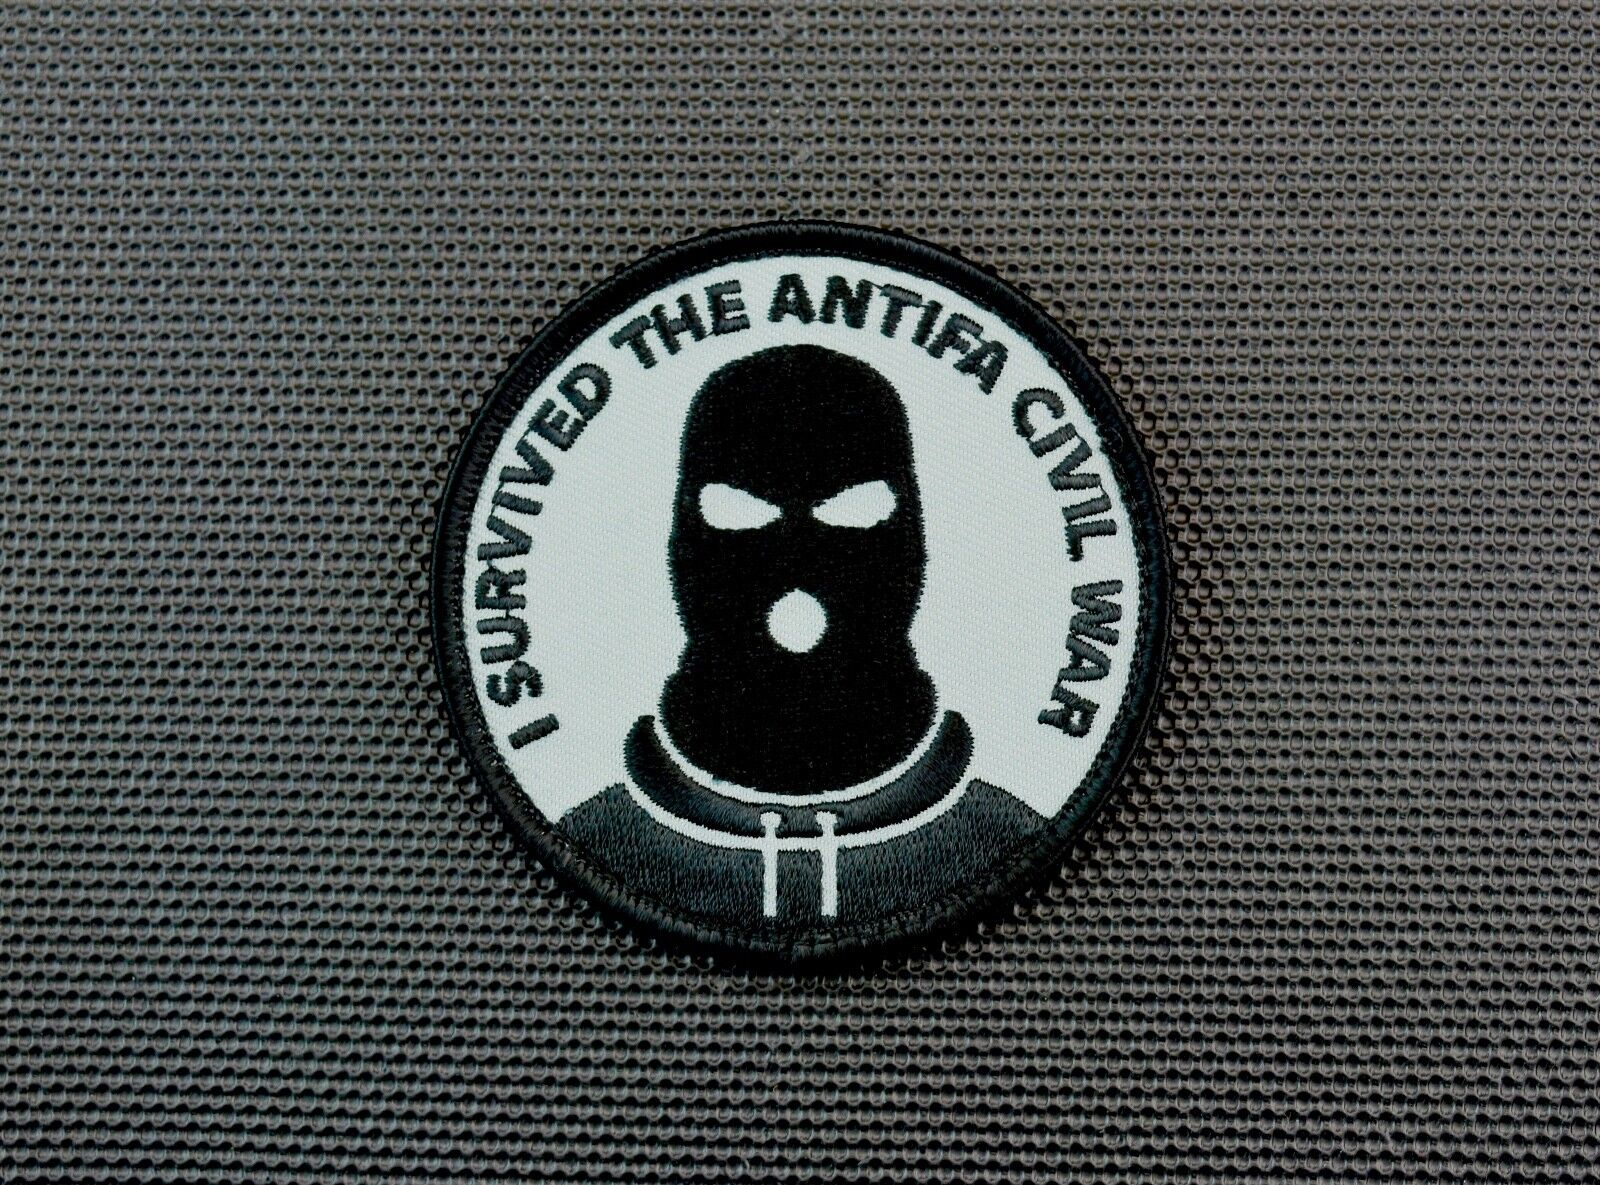 I Survived The ANTIFA Civil War Embroidered Patch 